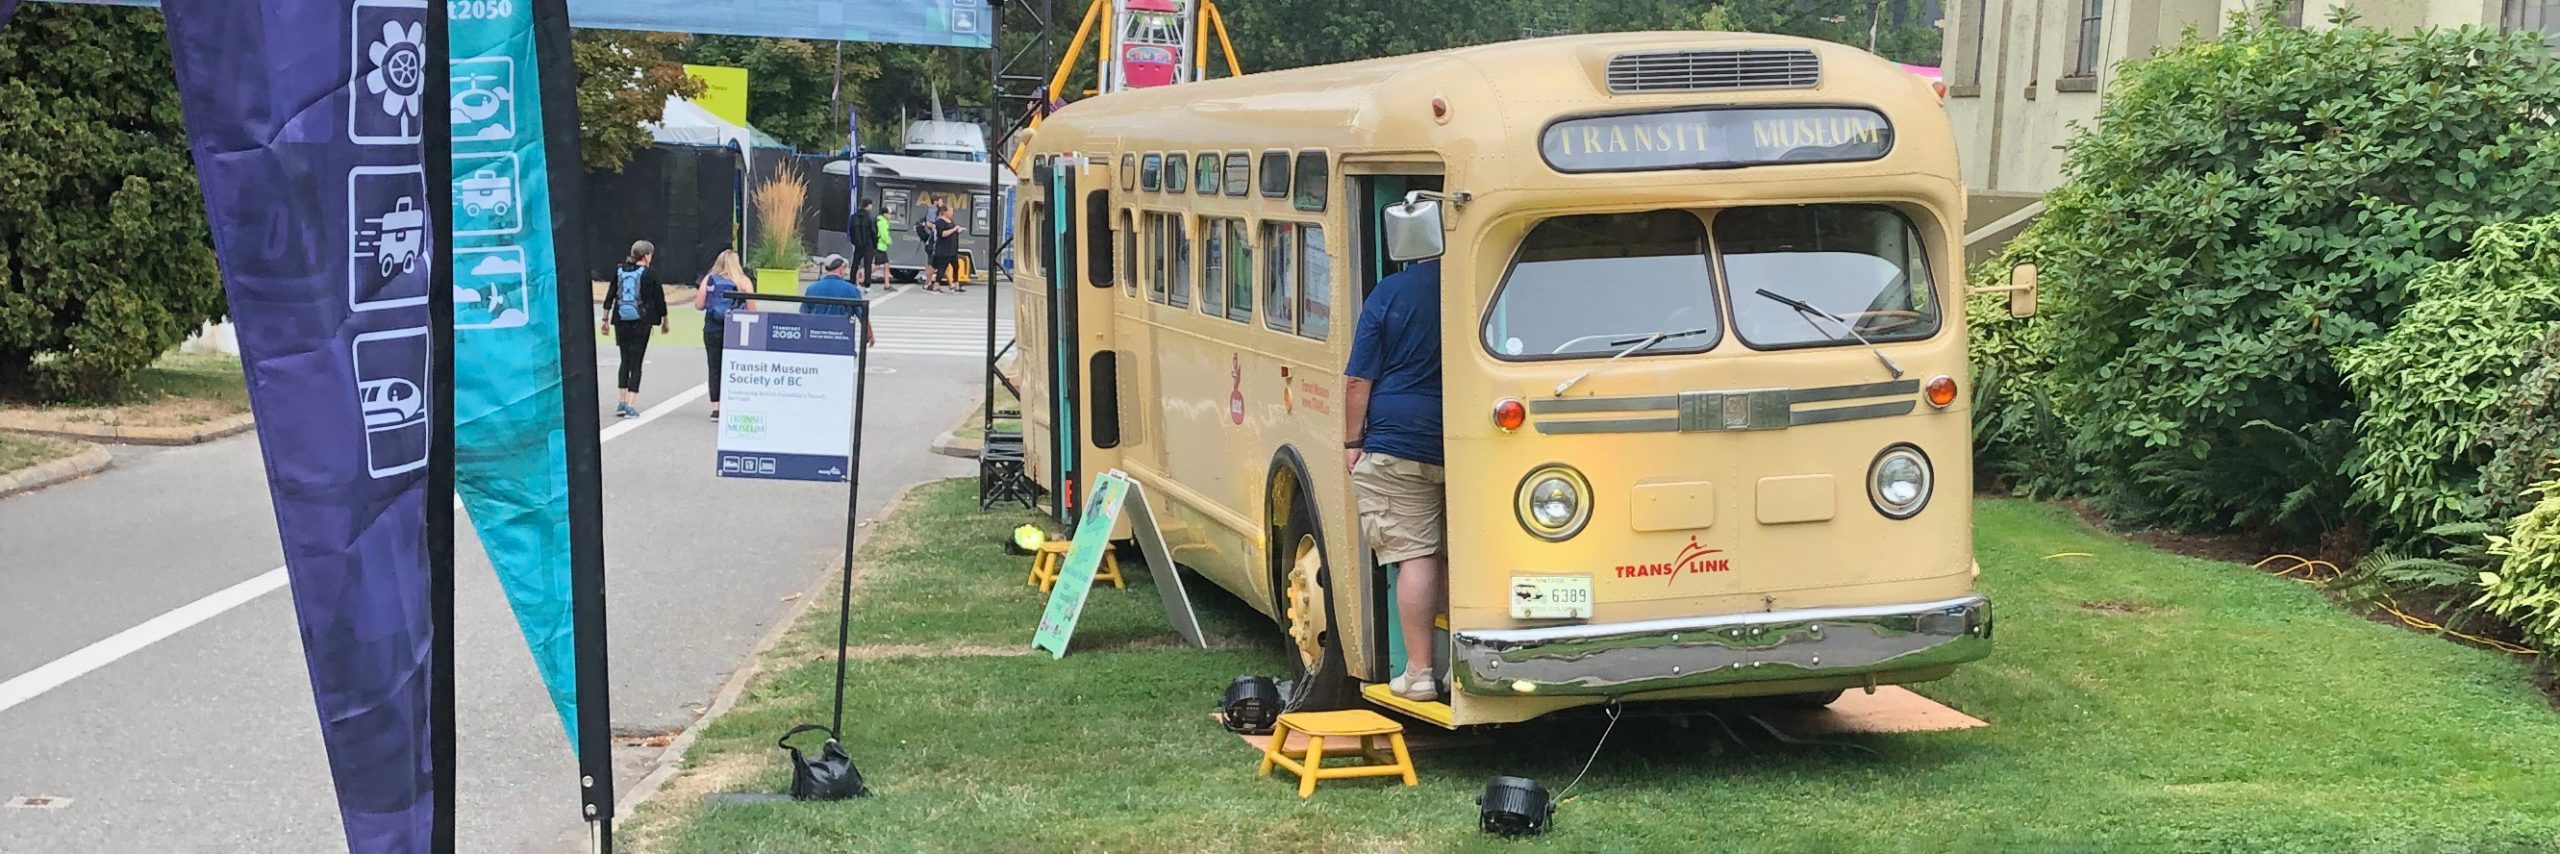 The historical museum bus at the 2019 PNE Fair